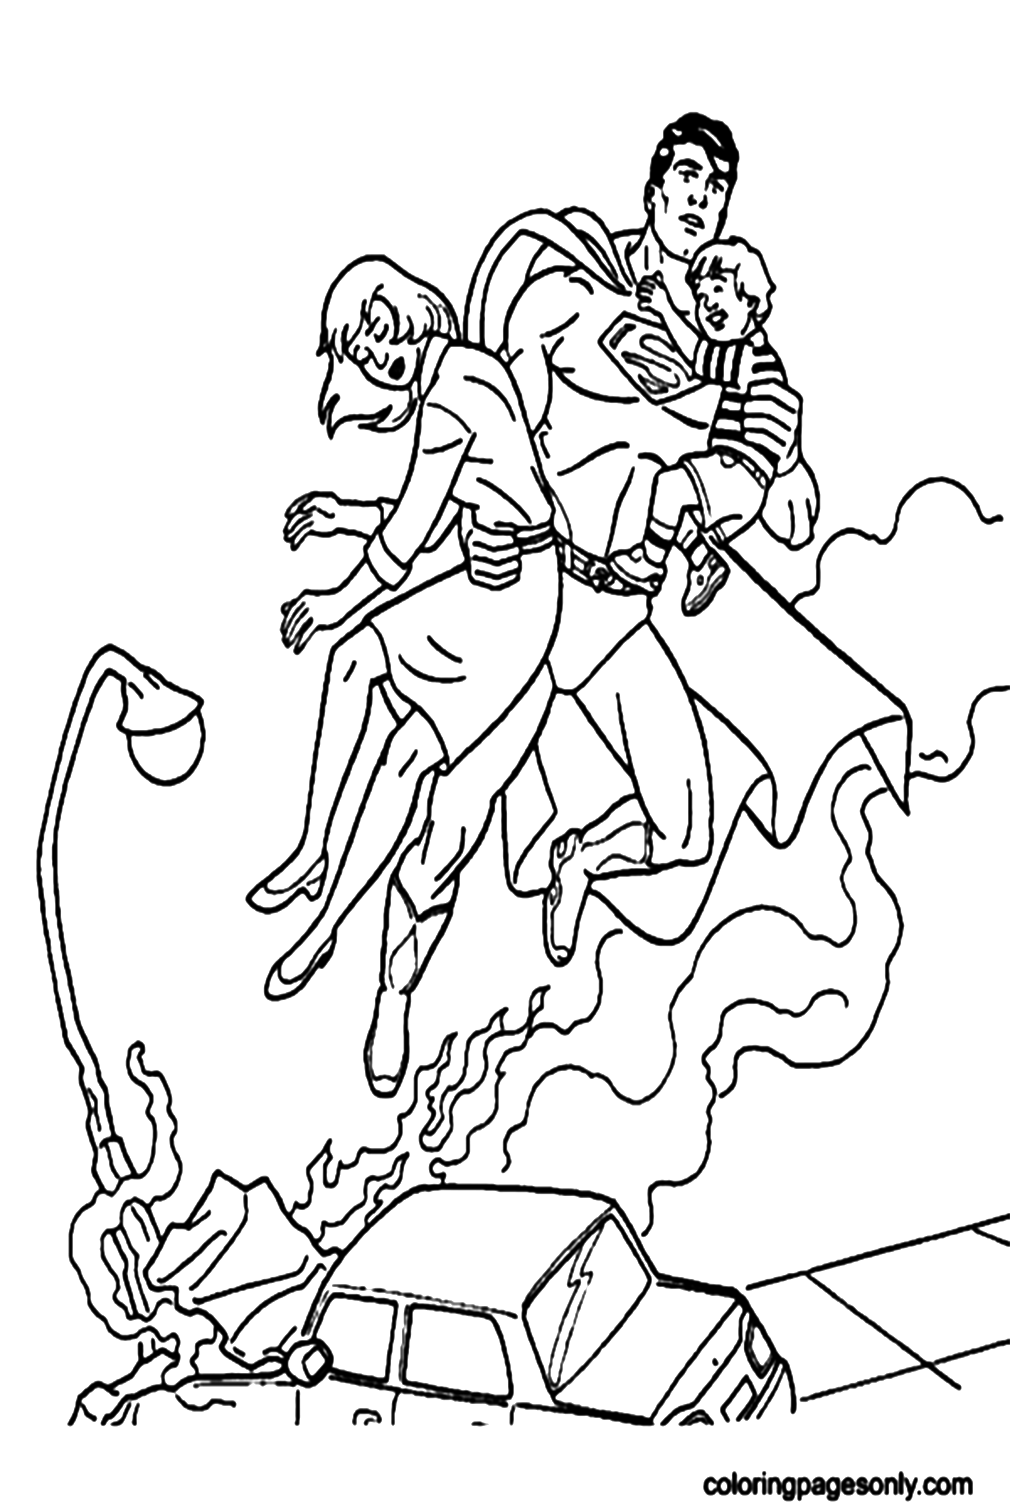 Superman Is Saving A Woman And A Child Coloring Pages